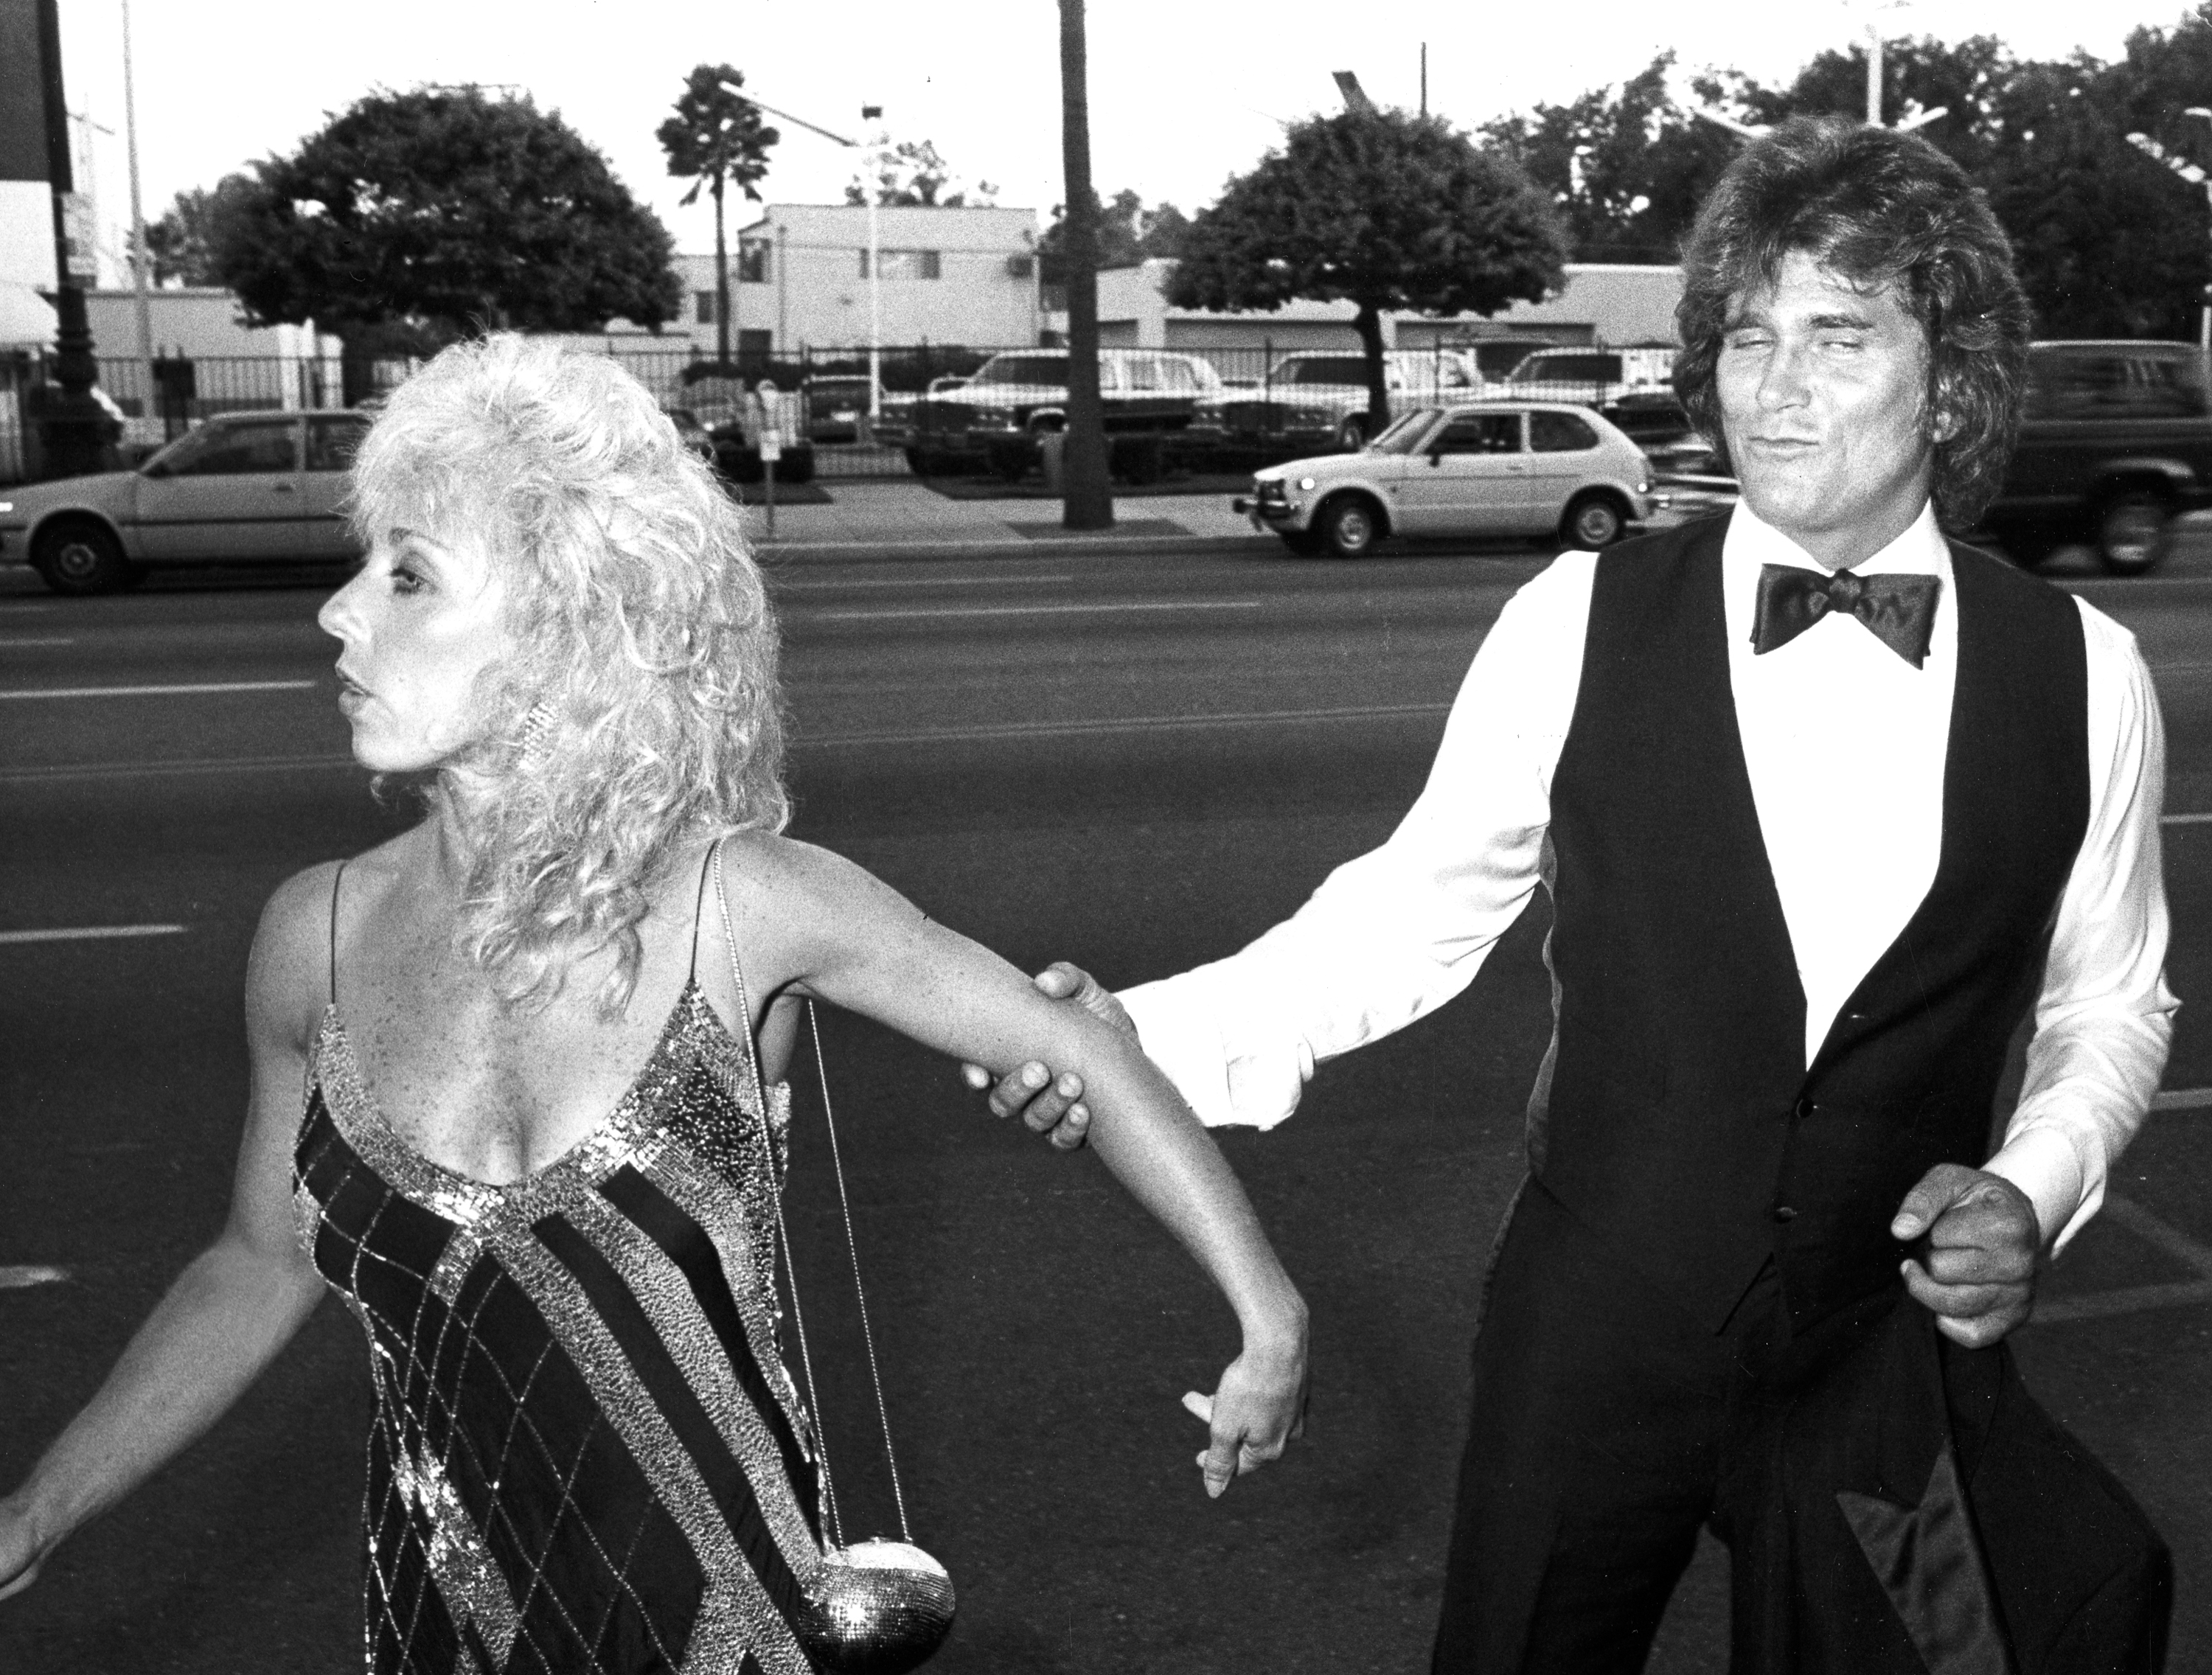 Michael Landon and wife Cindy Clerico in Beverly Hills, California, 1984 | Source: Ron Galella/Ron Galella Collection via Getty Images